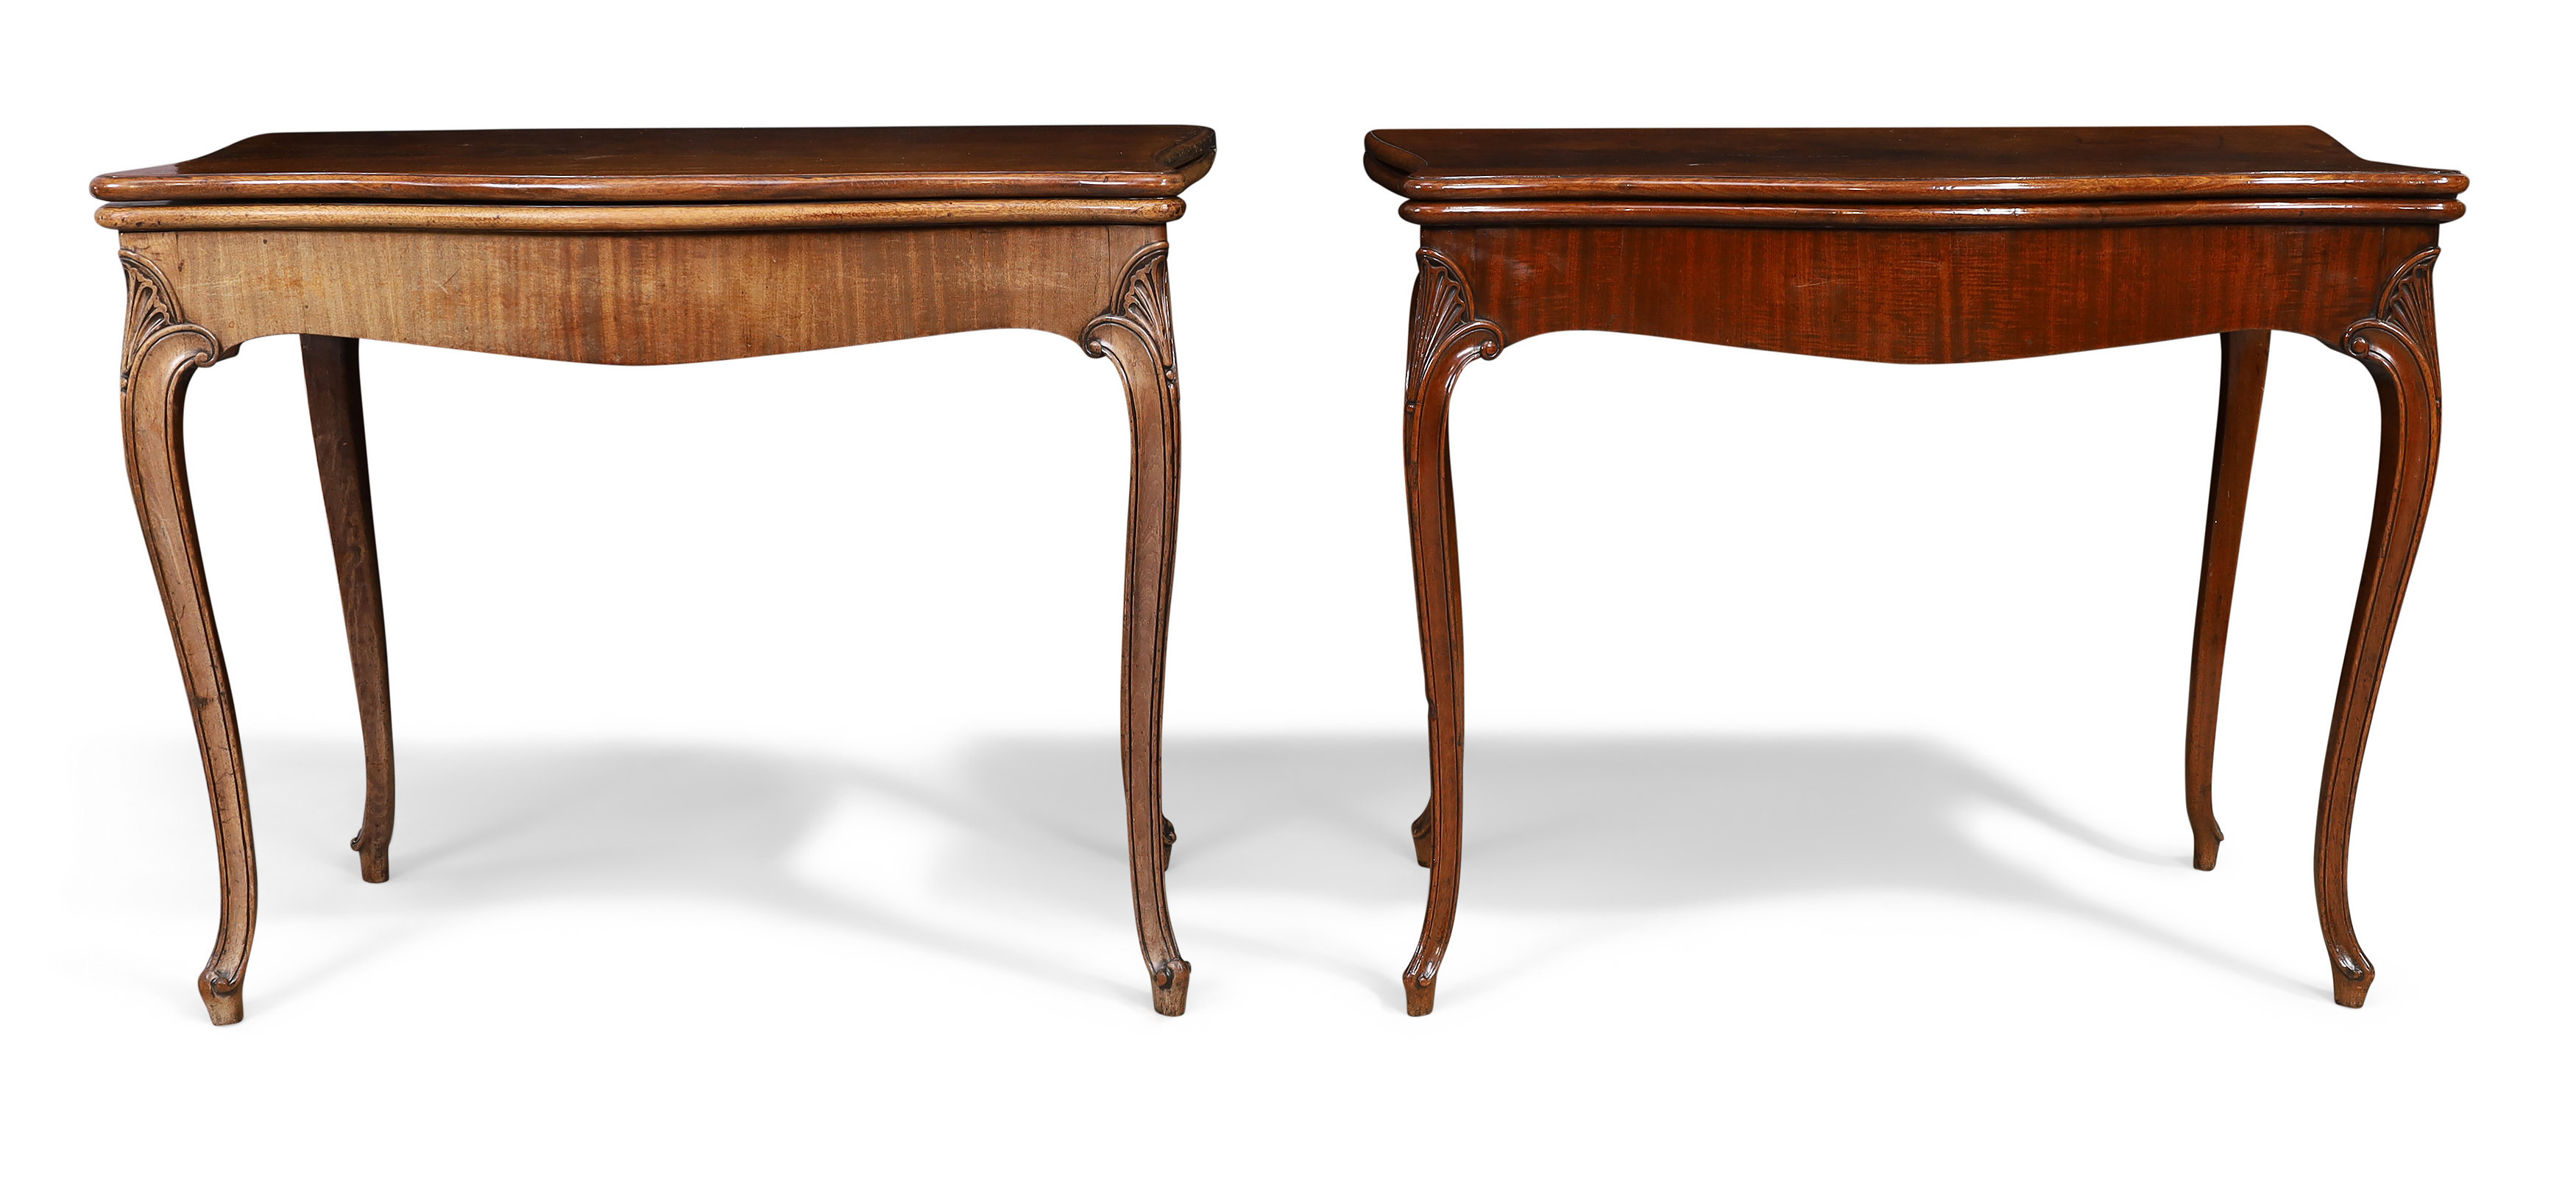 A near pair of George III mahogany serpentine concertina action tea tables, third quarter 18th ce...